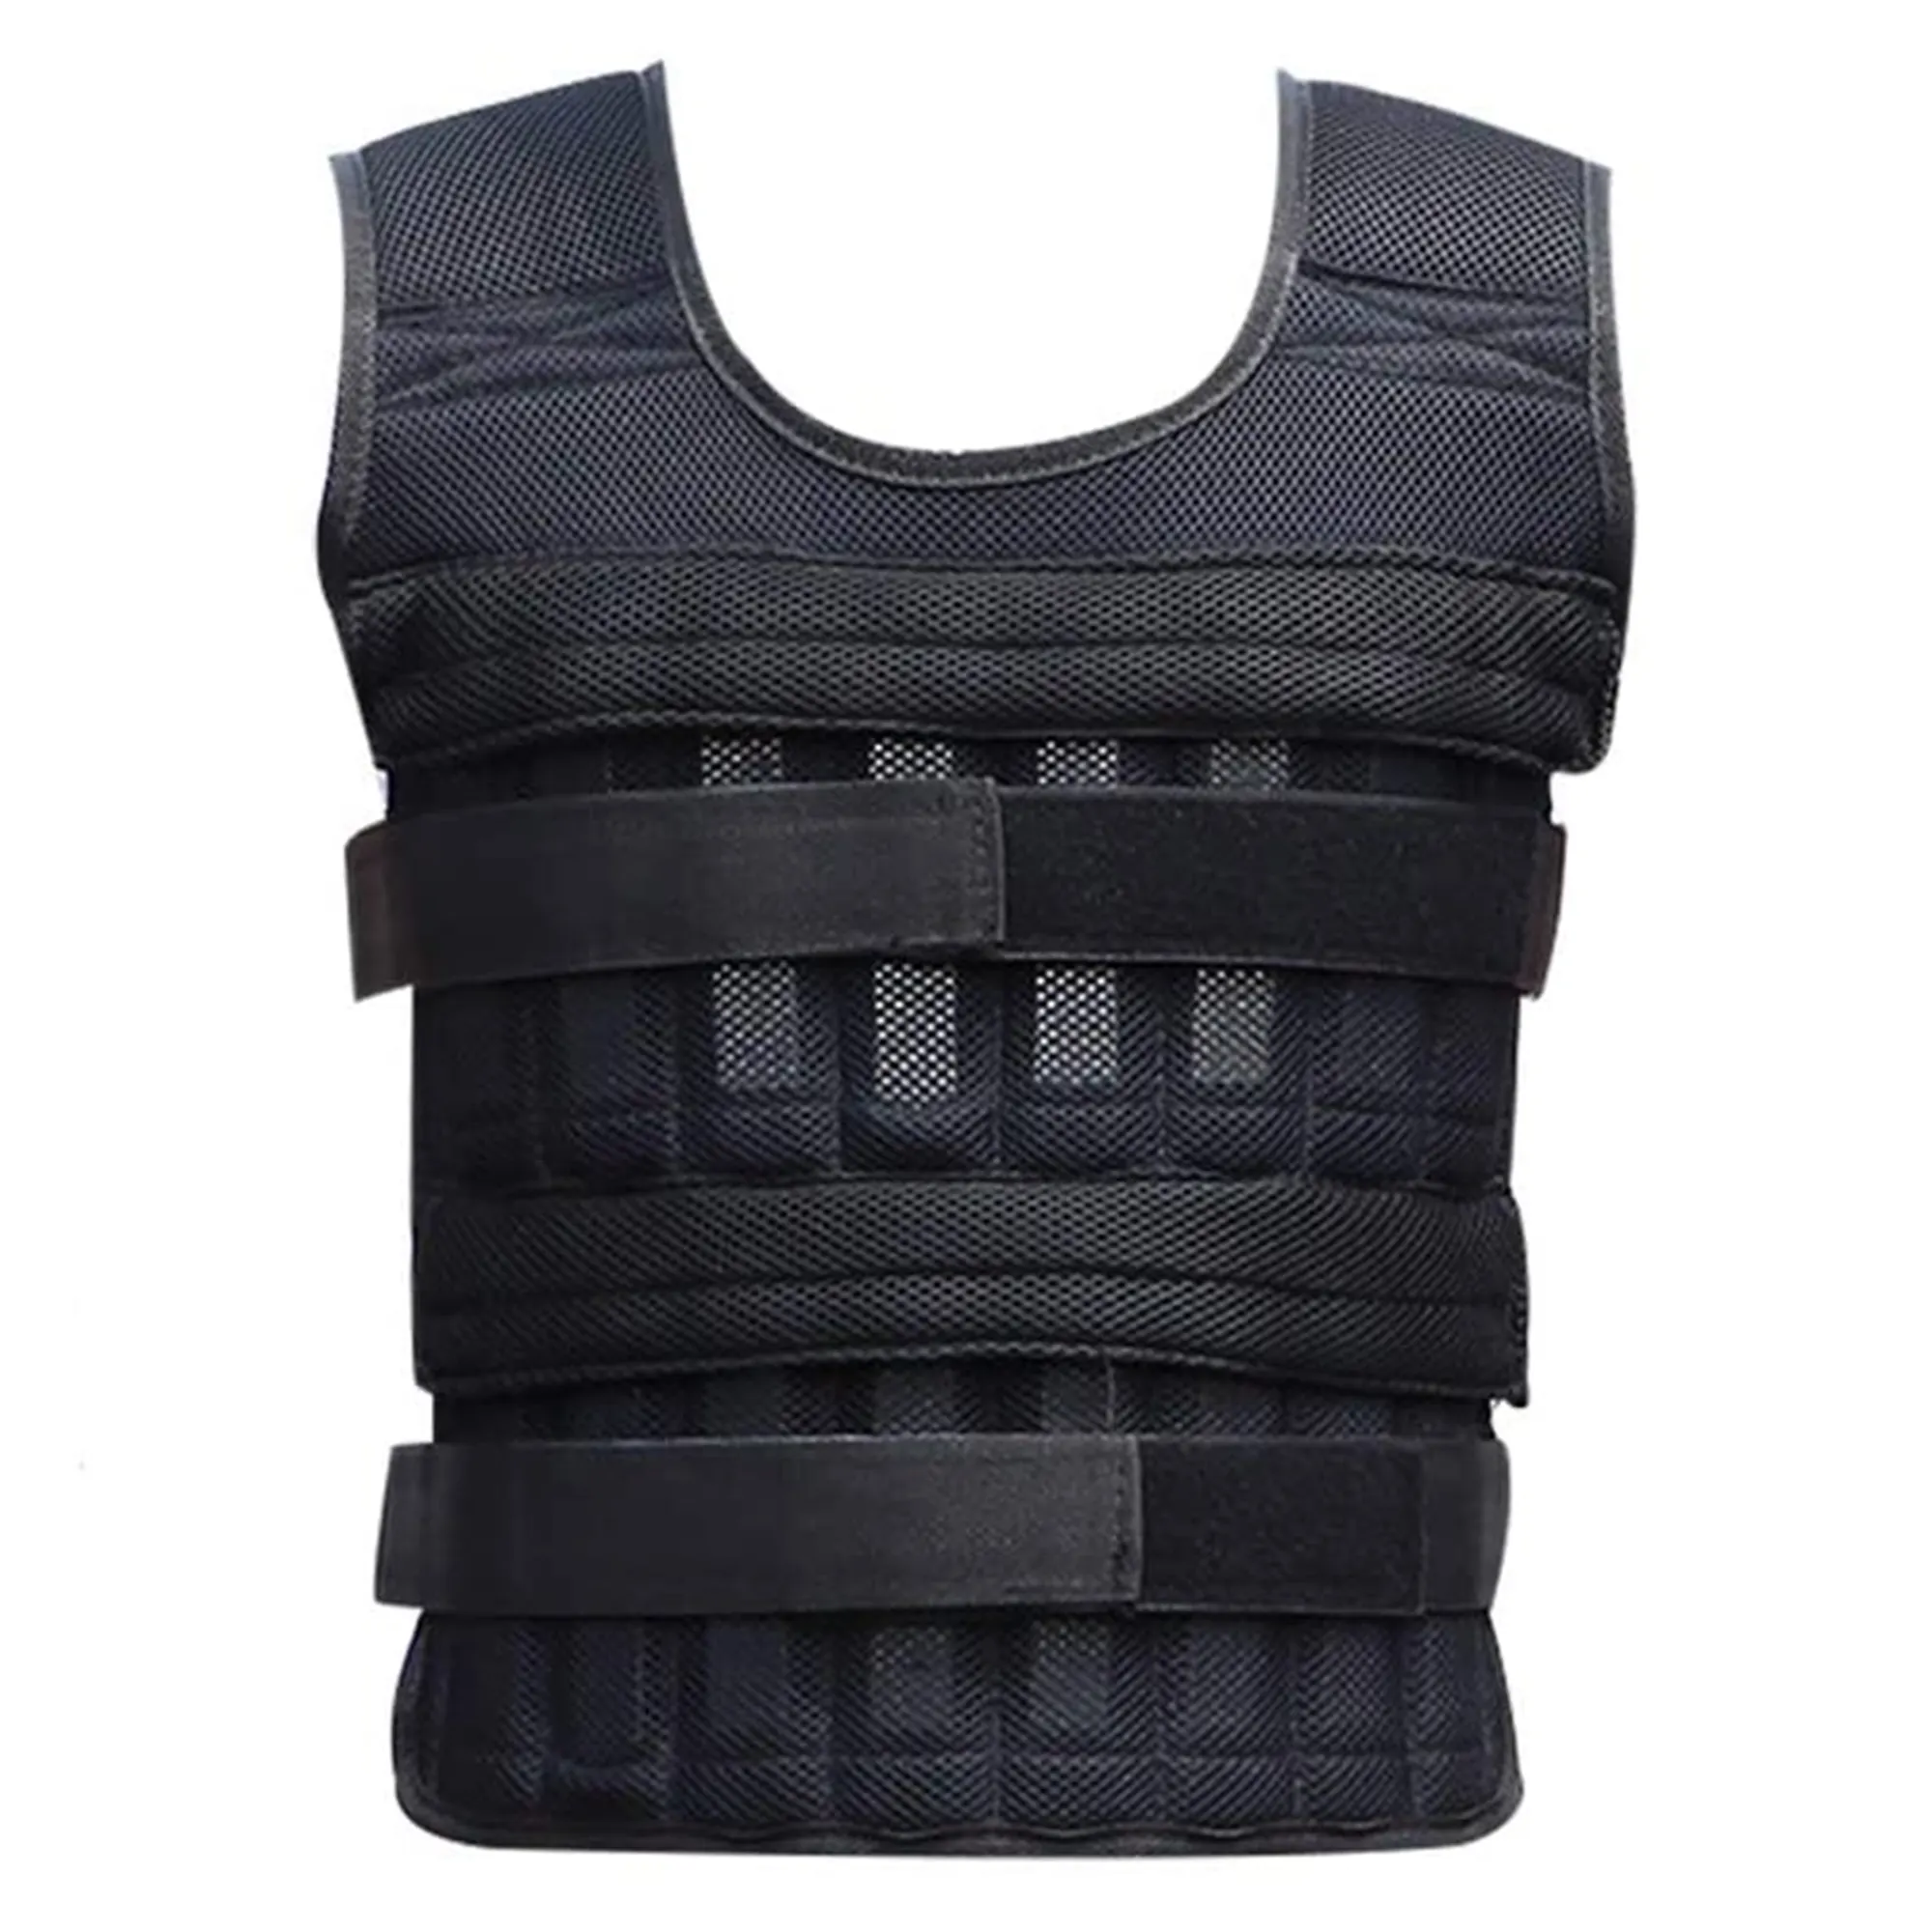 Pro Weighted Vest 8-20 kg Gym Running Fitness Training Weight Loss Jacket